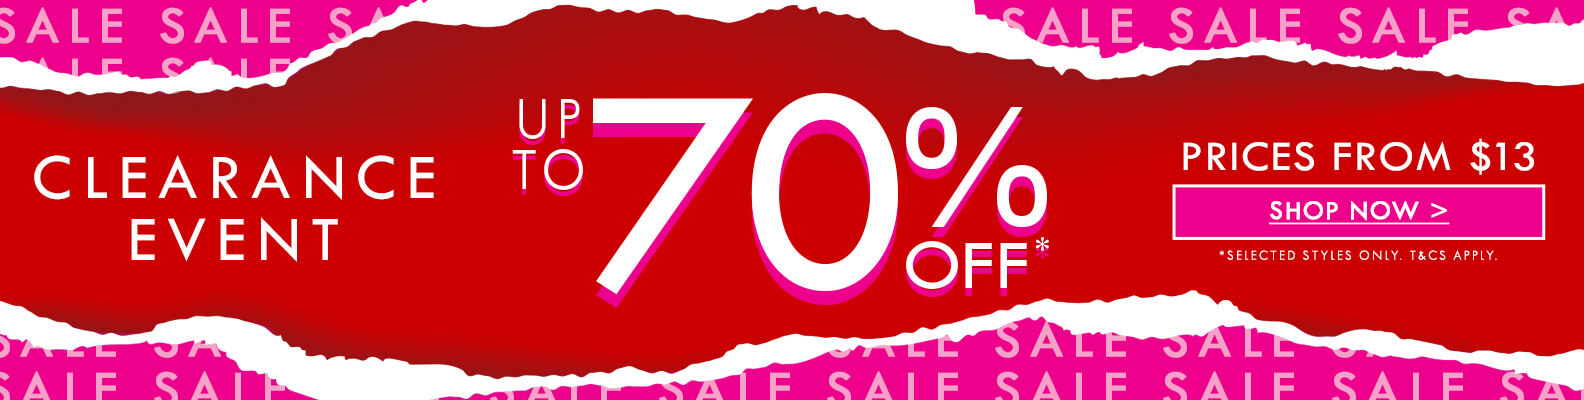 Up to 70% OFF on clearance sale event